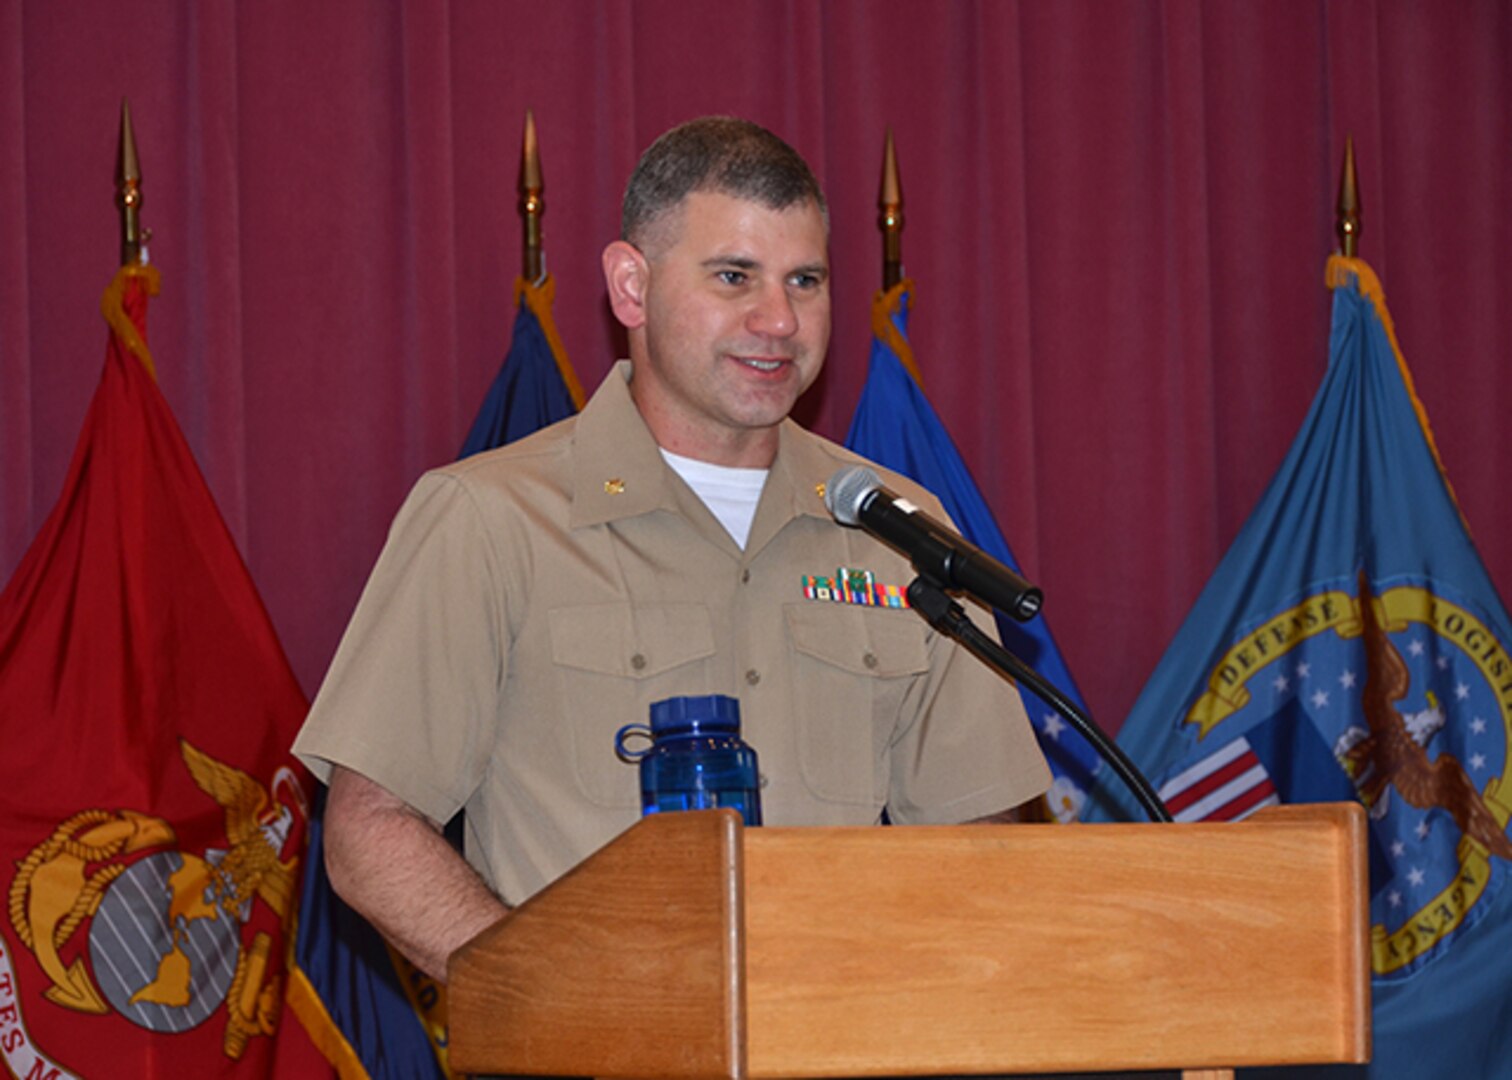 Marine Corps Maj. Chris Story serves as the master of ceremonies at the DLA Aviation Marine Corps’ 105th aviation birthday celebration held May 22, 2017 in the Center Restaurant on Defense Supply Center Richmond, Virginia. 